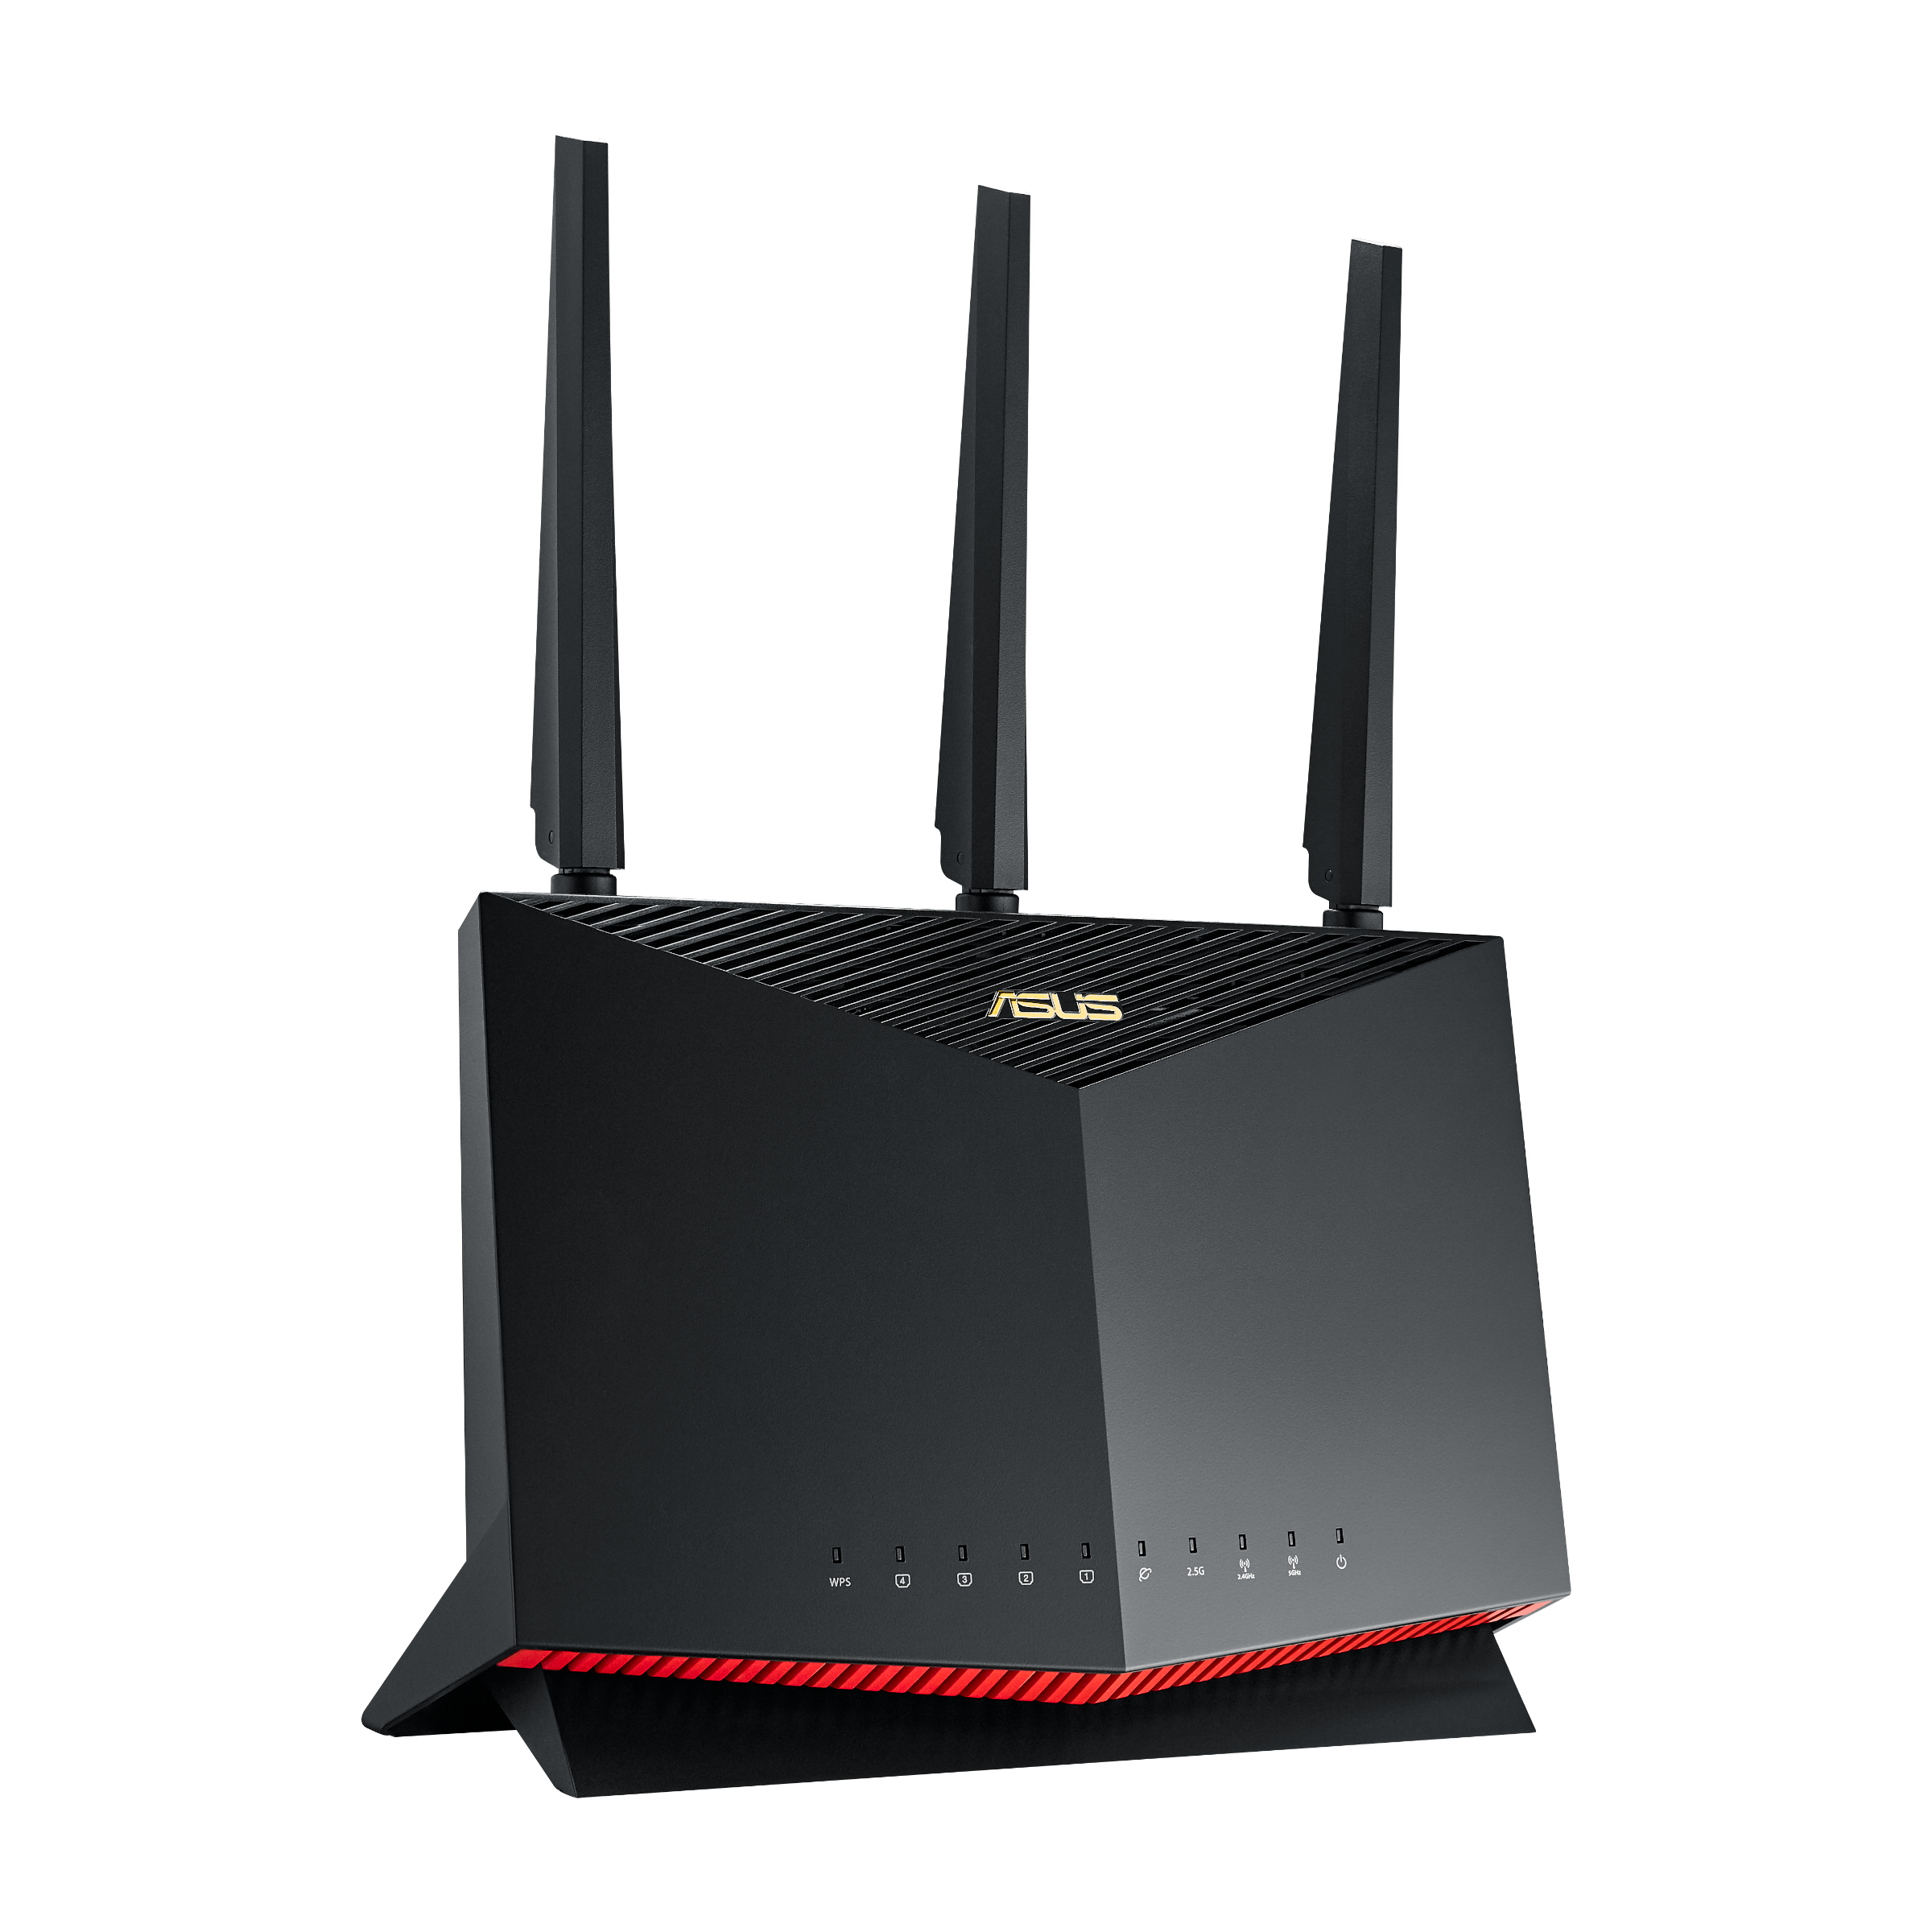 Asus RT-AX86U Review: One of the Best Wi-Fi 6 Routers for the